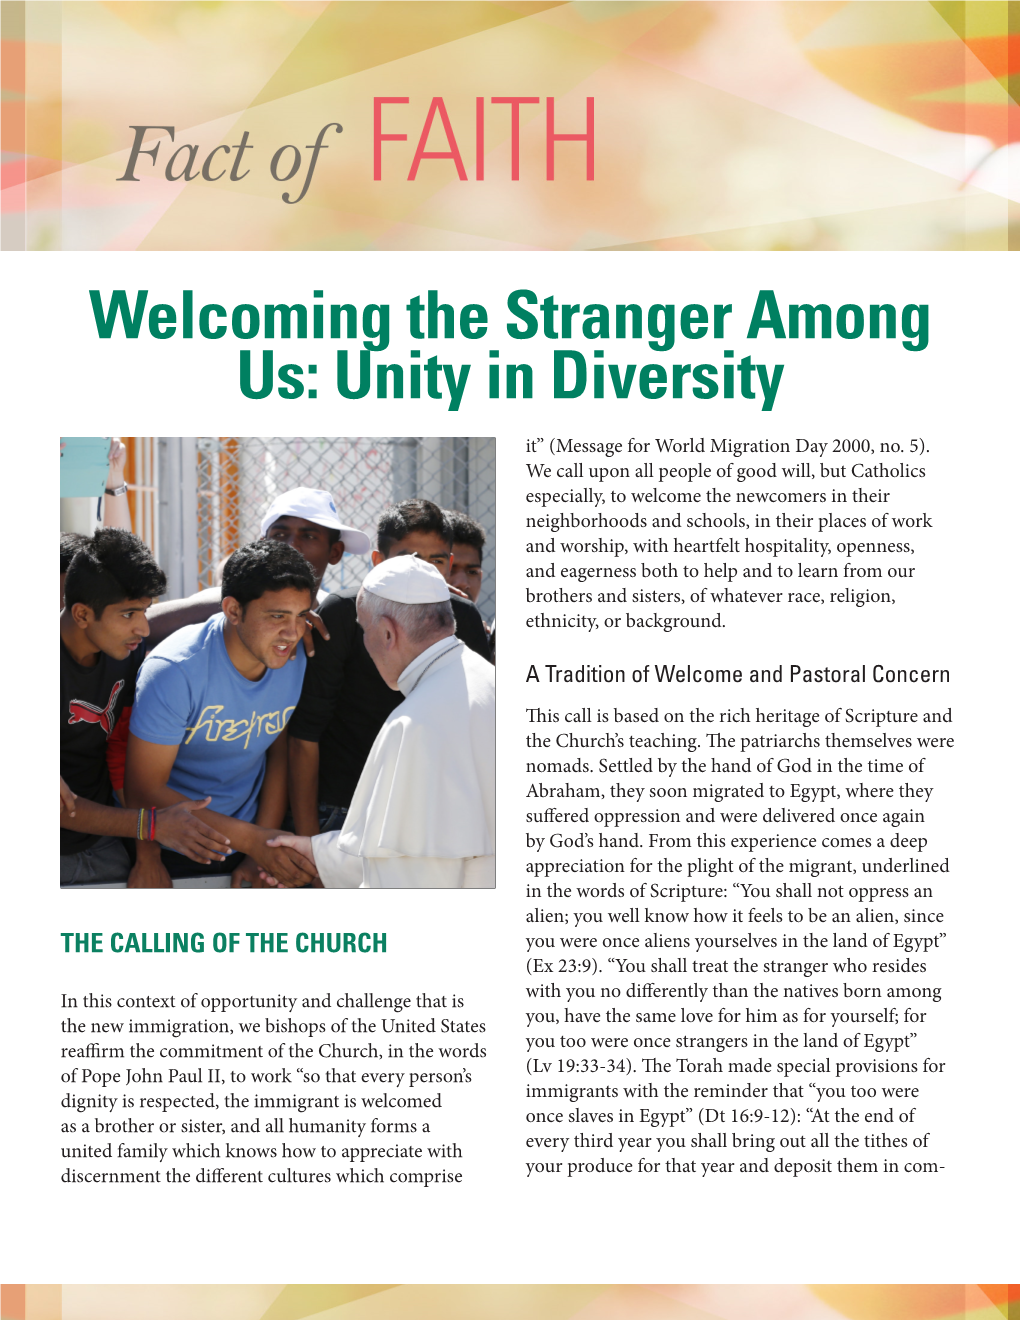 Welcoming the Stranger Among Us: Unity in Diversity